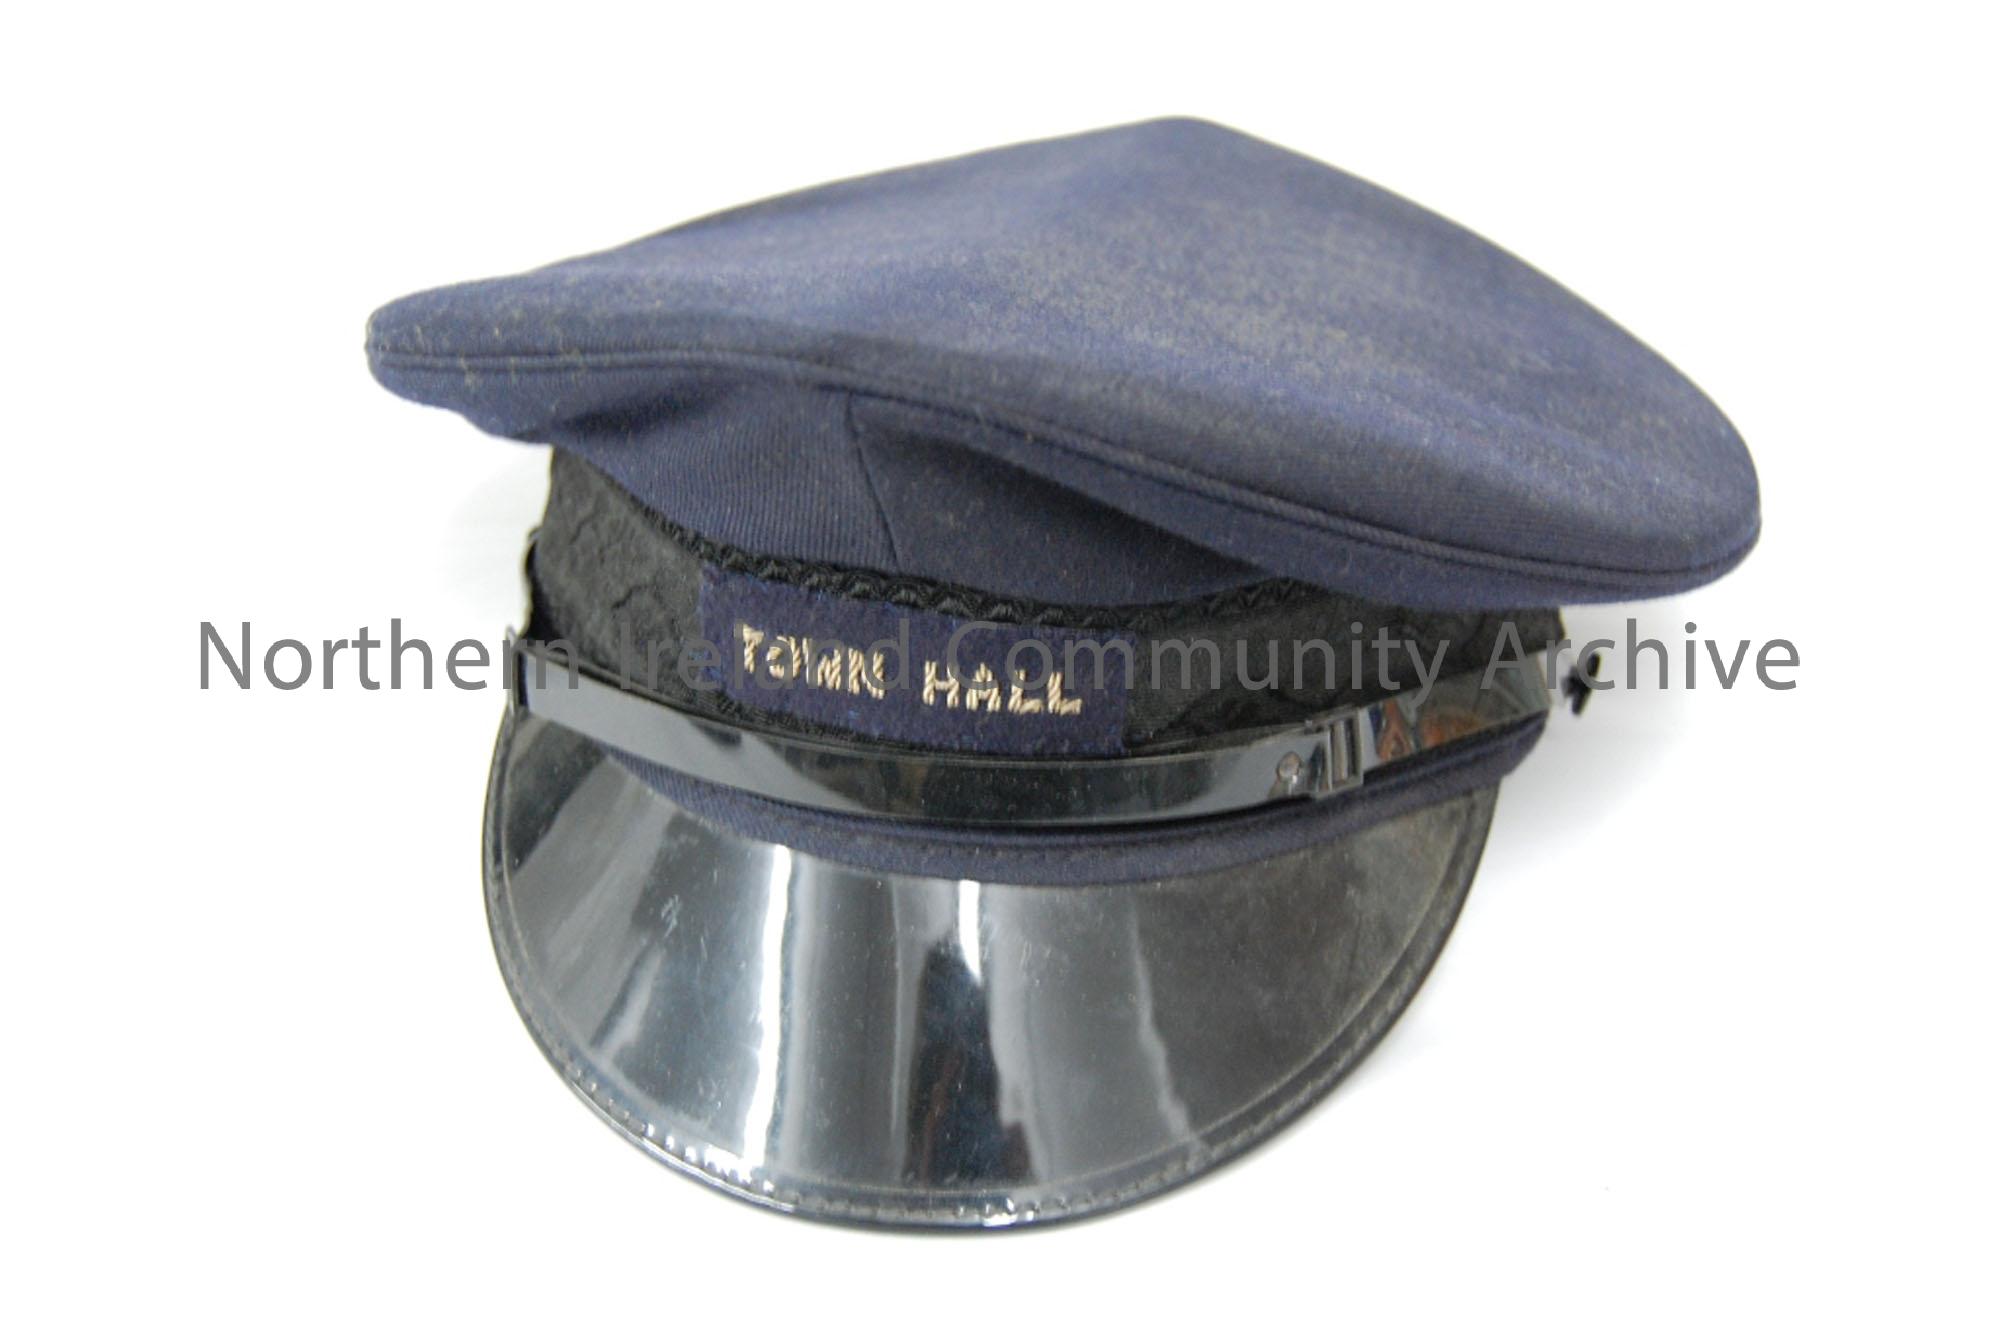 Navy Town Hall cap worn by town hall caretaker